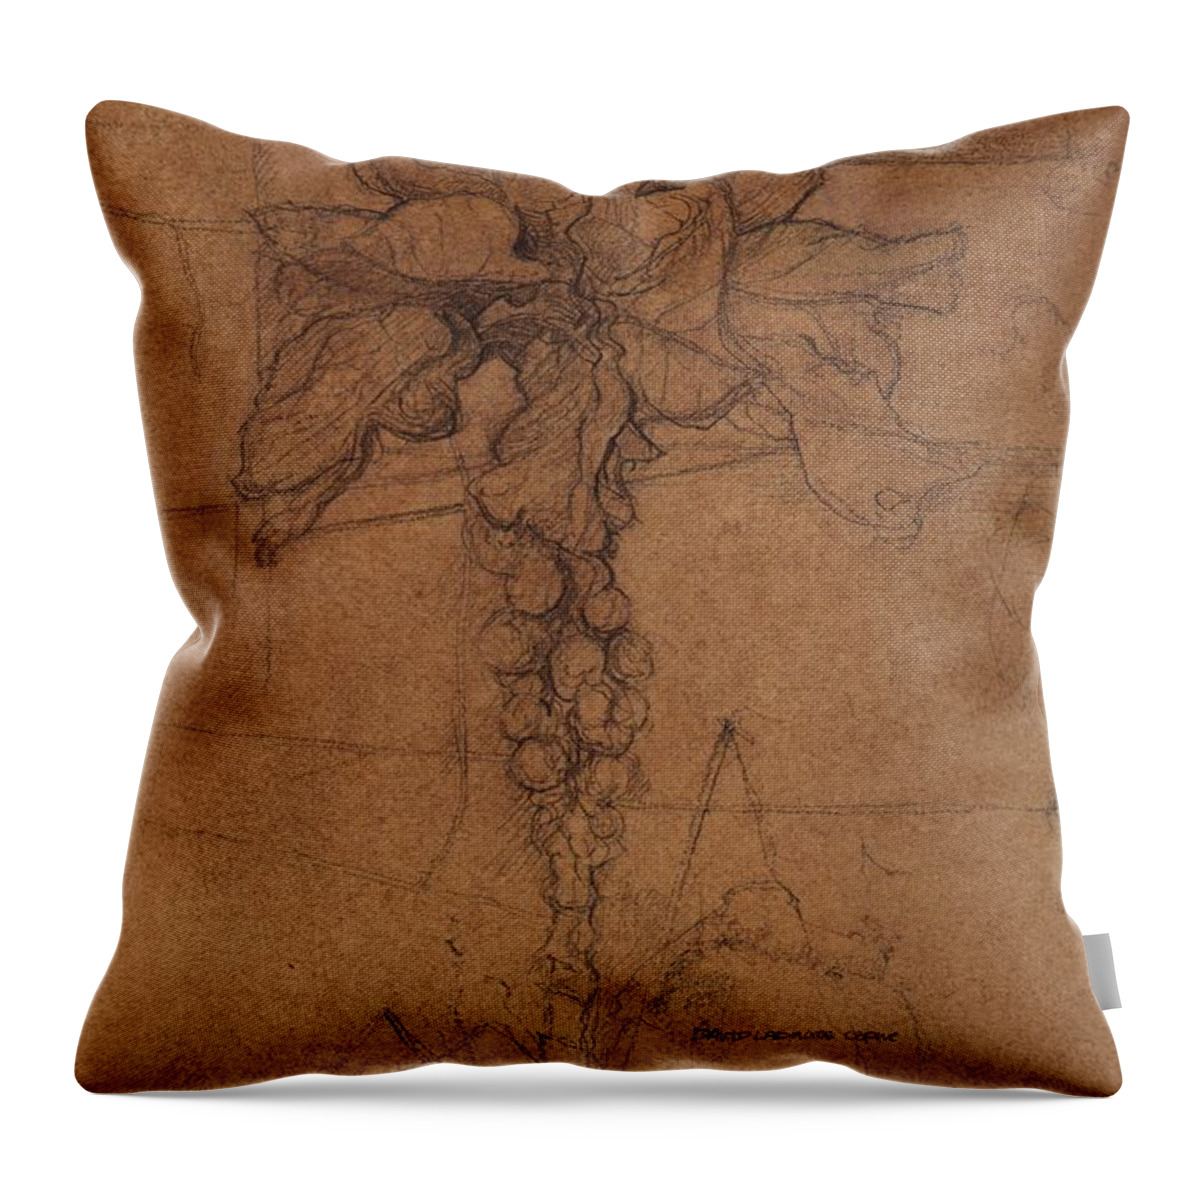 Plant Throw Pillow featuring the drawing Allotment Study by David Ladmore